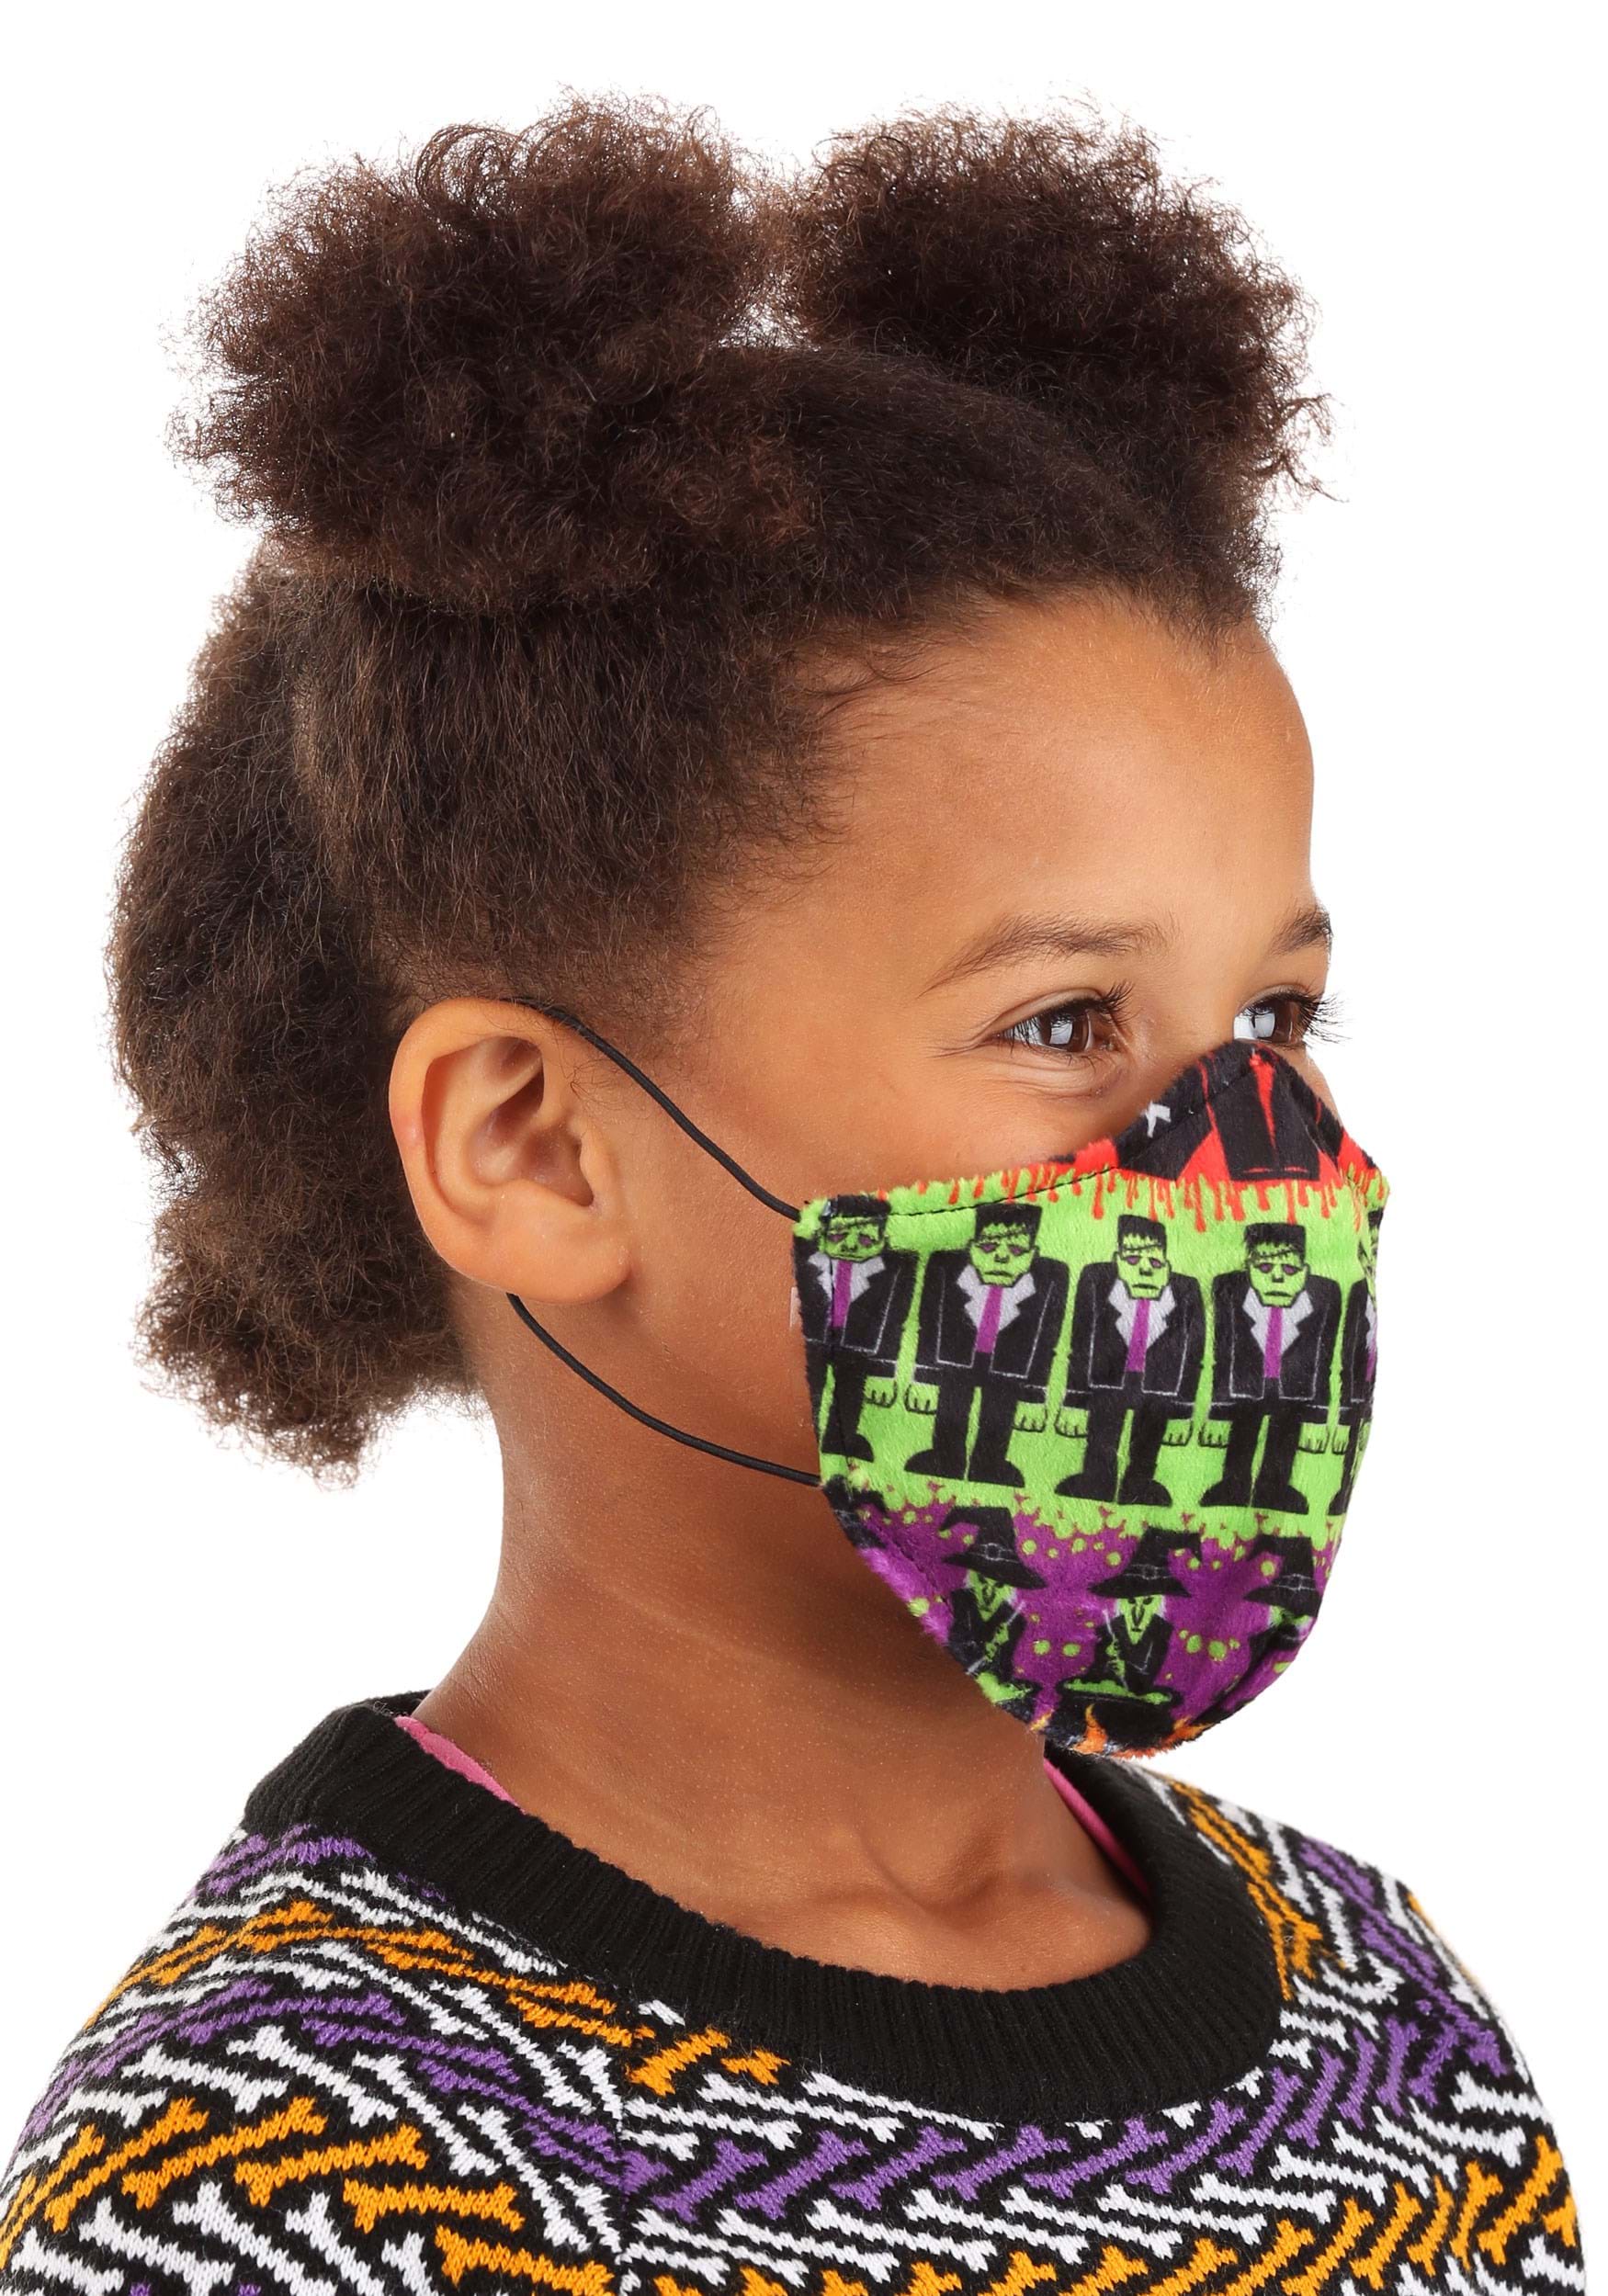 Sublimated Child Monsters Face Mask